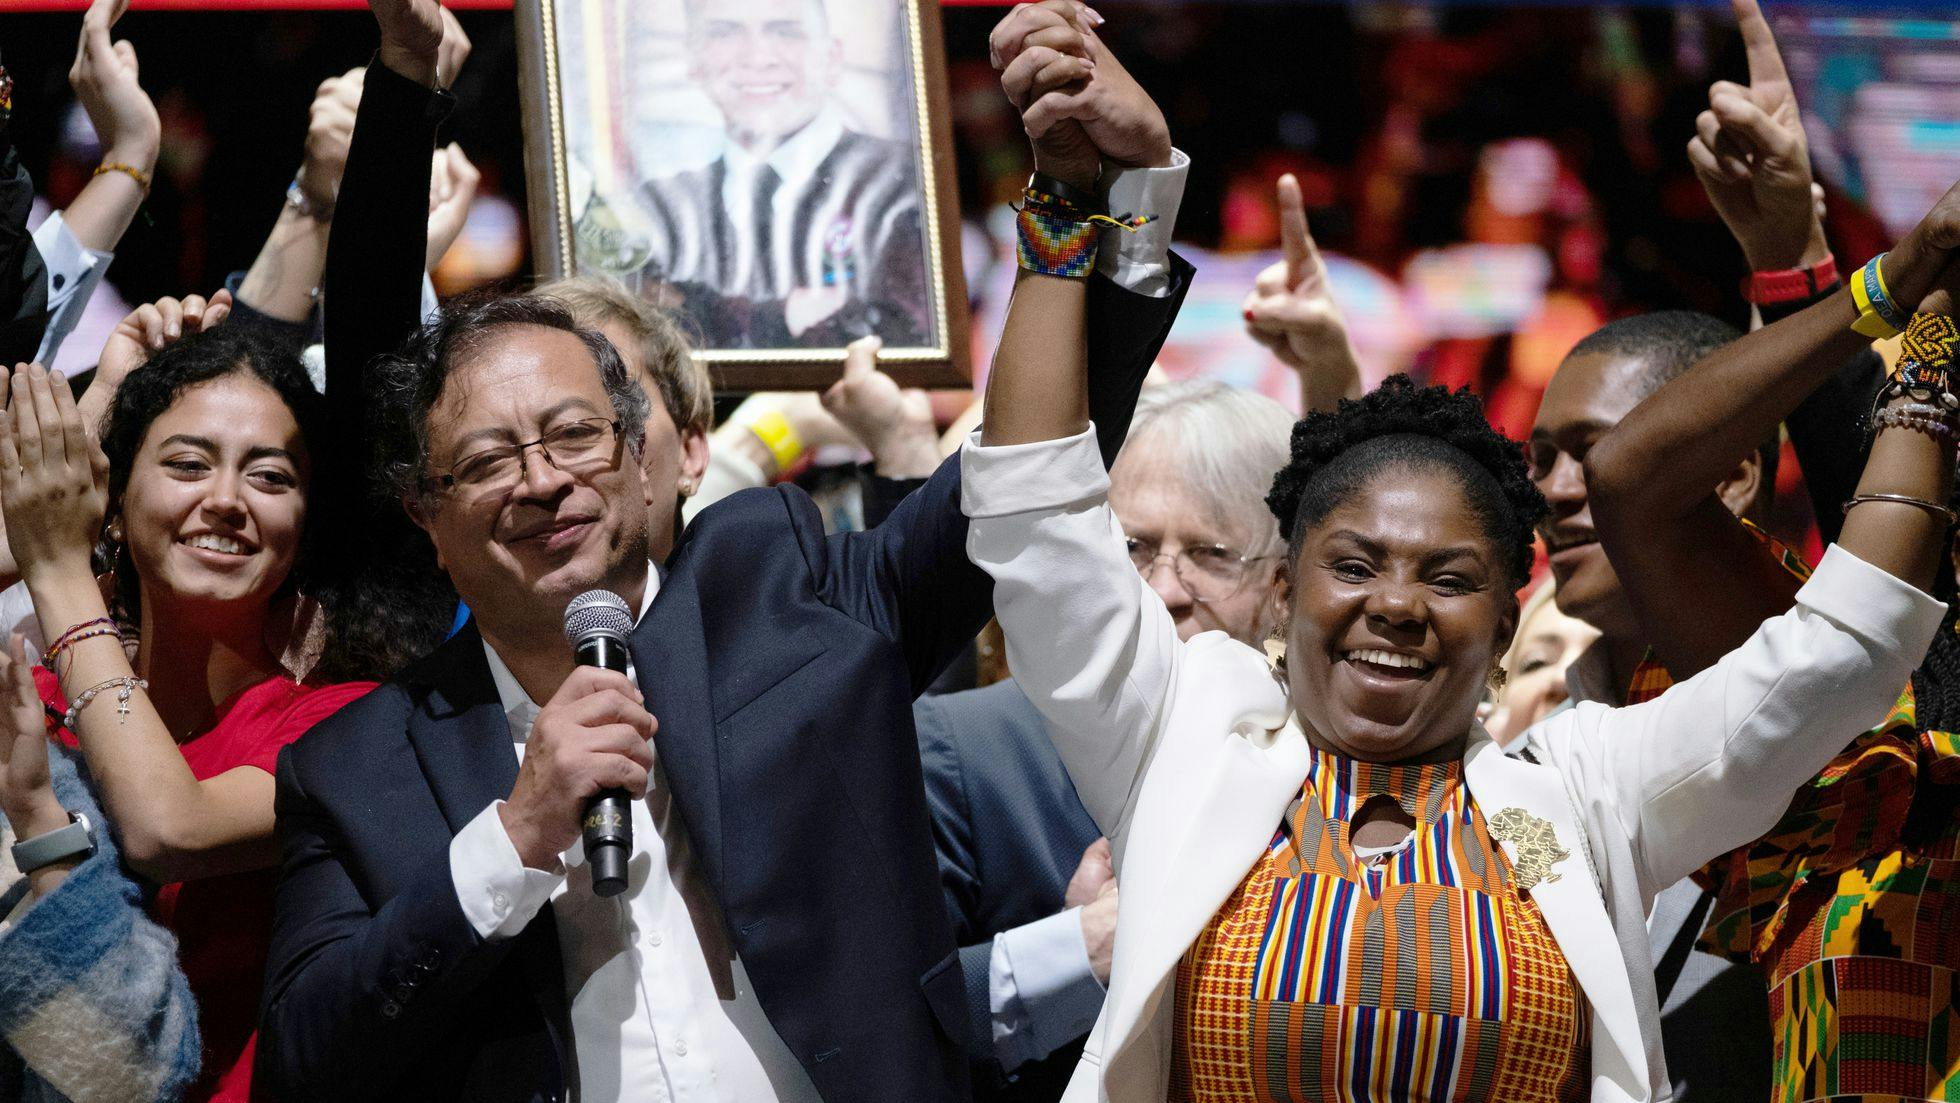 Colombia elects first leftist president, rejecting traditional politicians